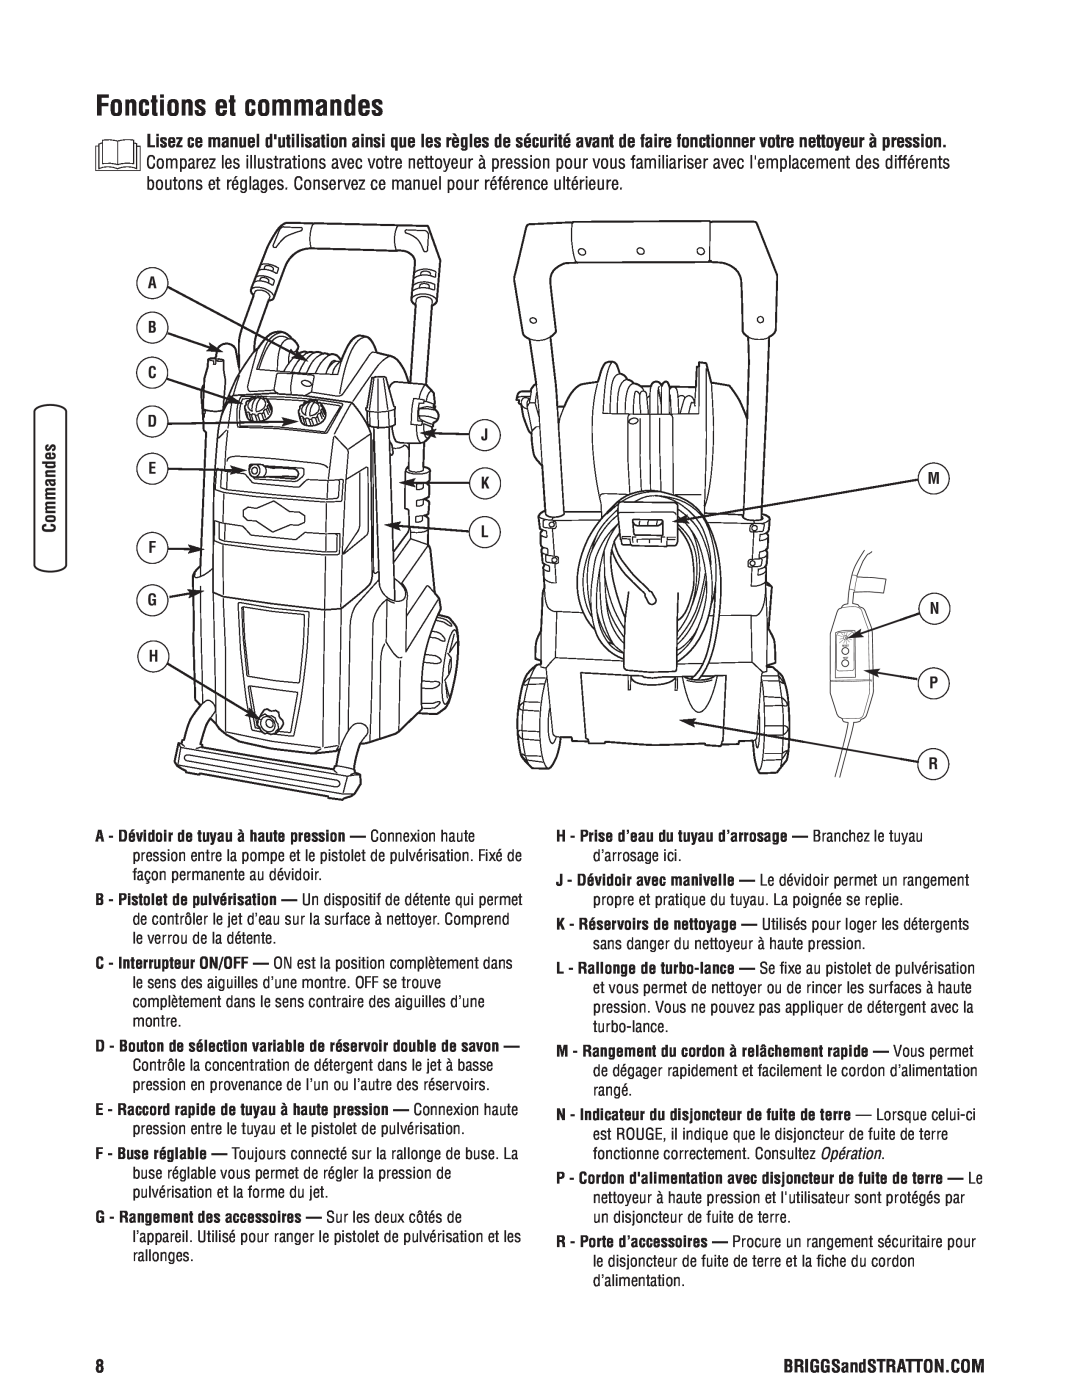 Briggs & Stratton Electric Pressure Washer manual Fonctions et commandes 